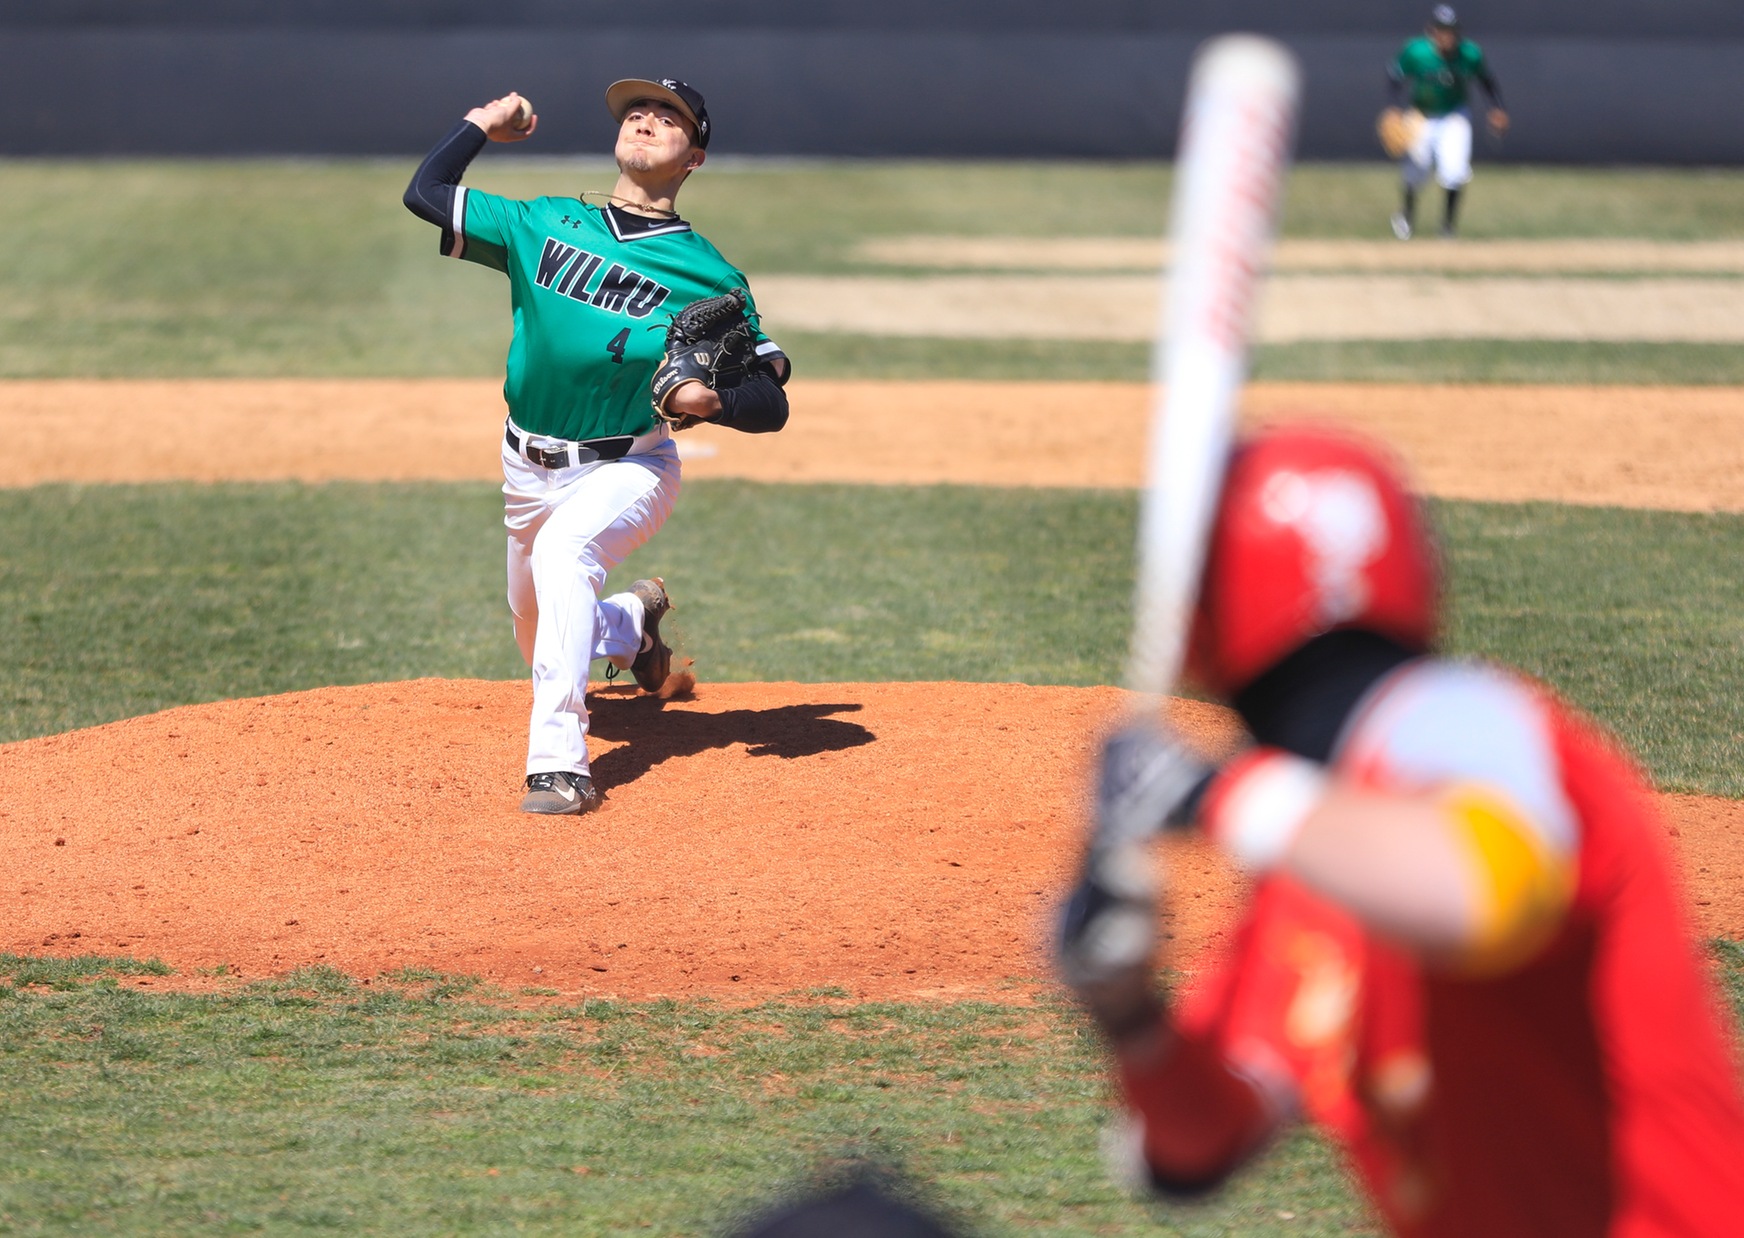 Copyright 2019; Wilmington University. All rights reserved. Photo of Kyle Maxwell, starter in game one against Chestnut Hill. Photo by Chris Vitale. March 26, 2019 vs. Chestnut Hill.